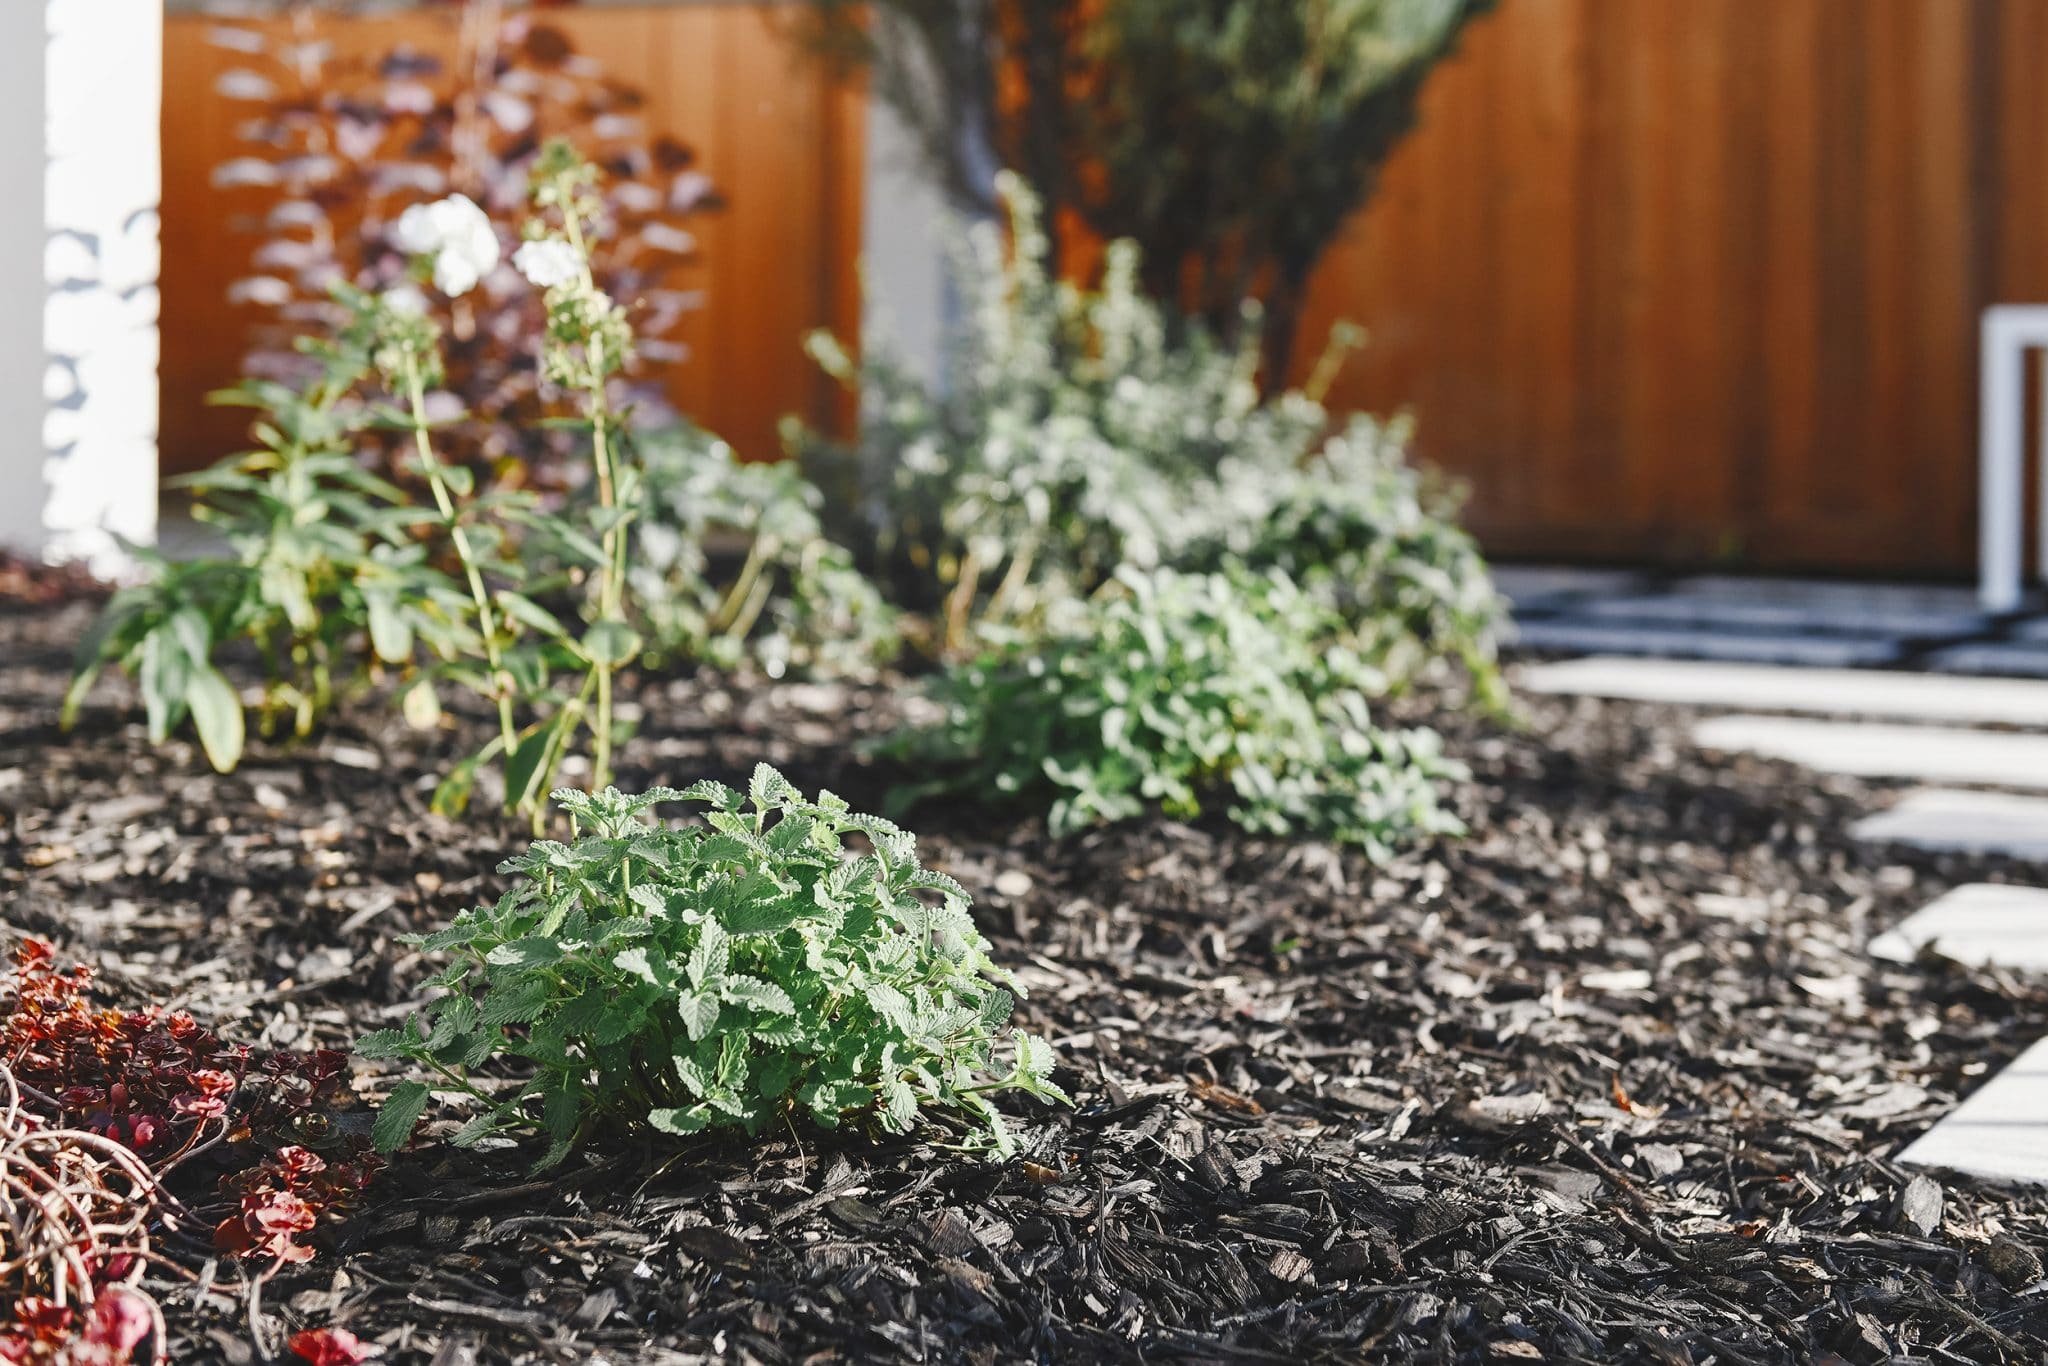 catmint lining our paver path | via Yellow Brick Home | small yard ideas 